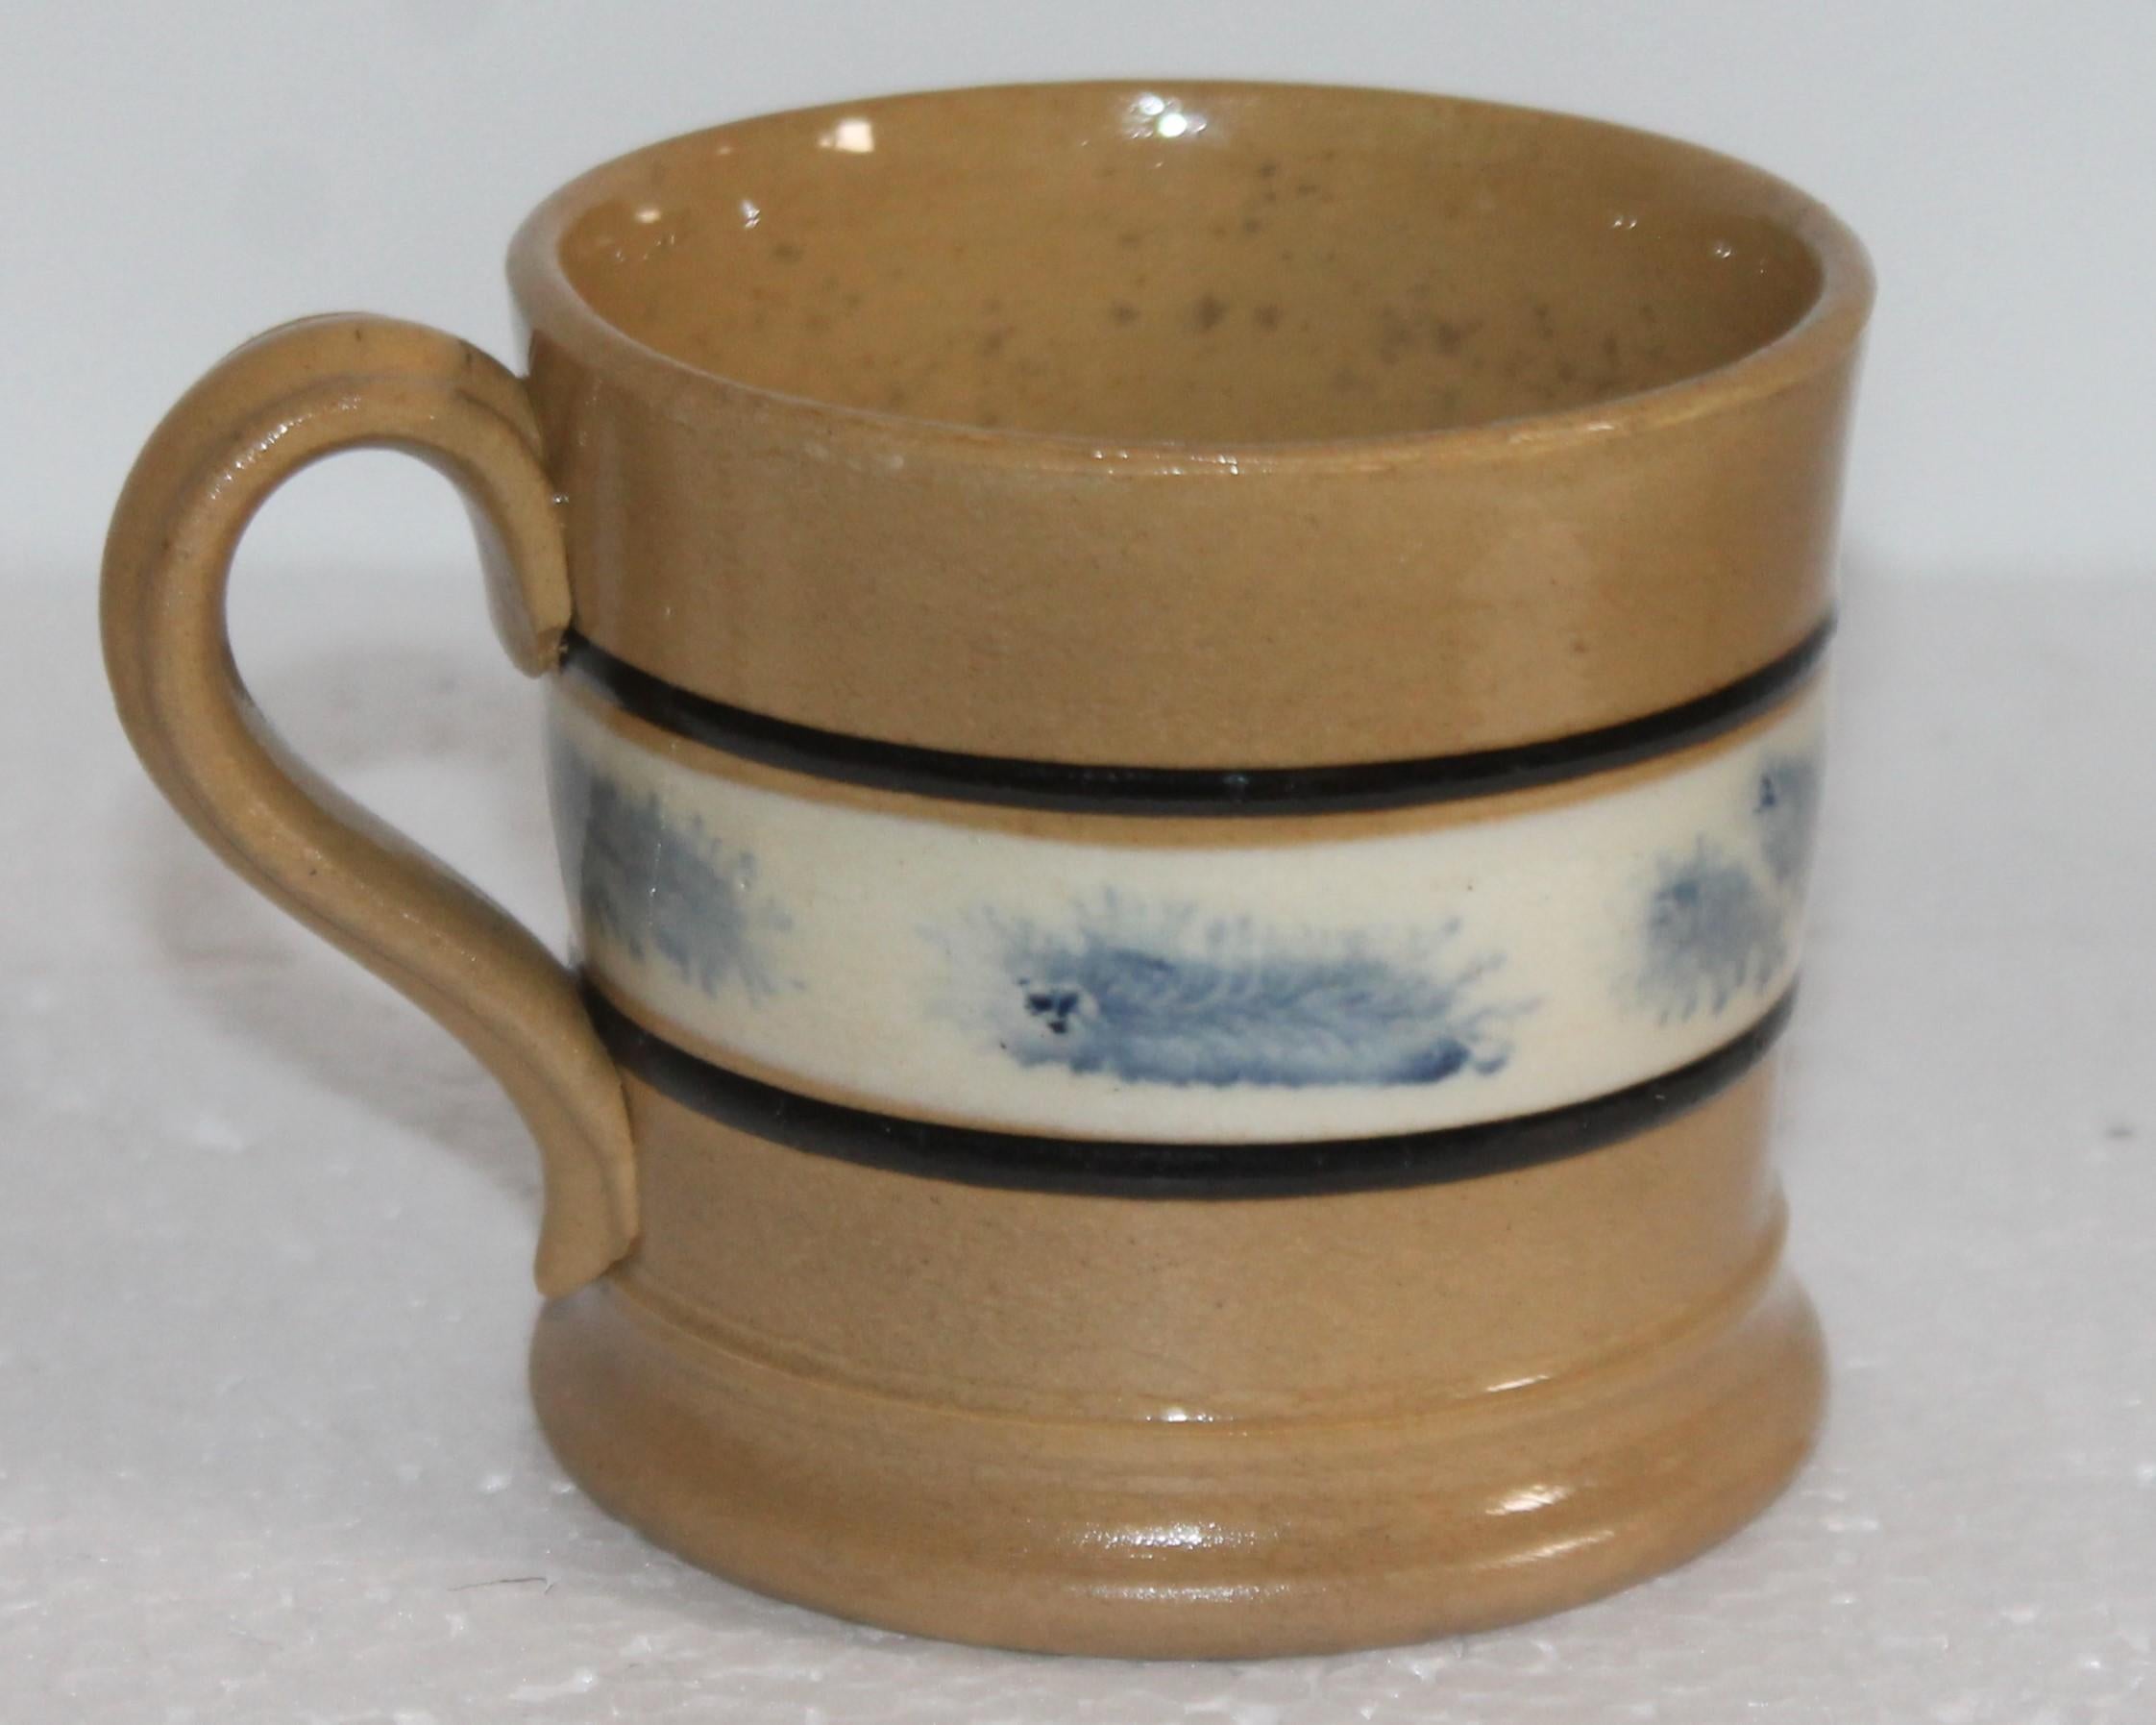 This 19th century mocha yellow ware mug with the blue sea weed pattern is in good condition. This mug has a tiny rim chip looks like its in the glaze. These mugs are super rare and hard to find in good condition.